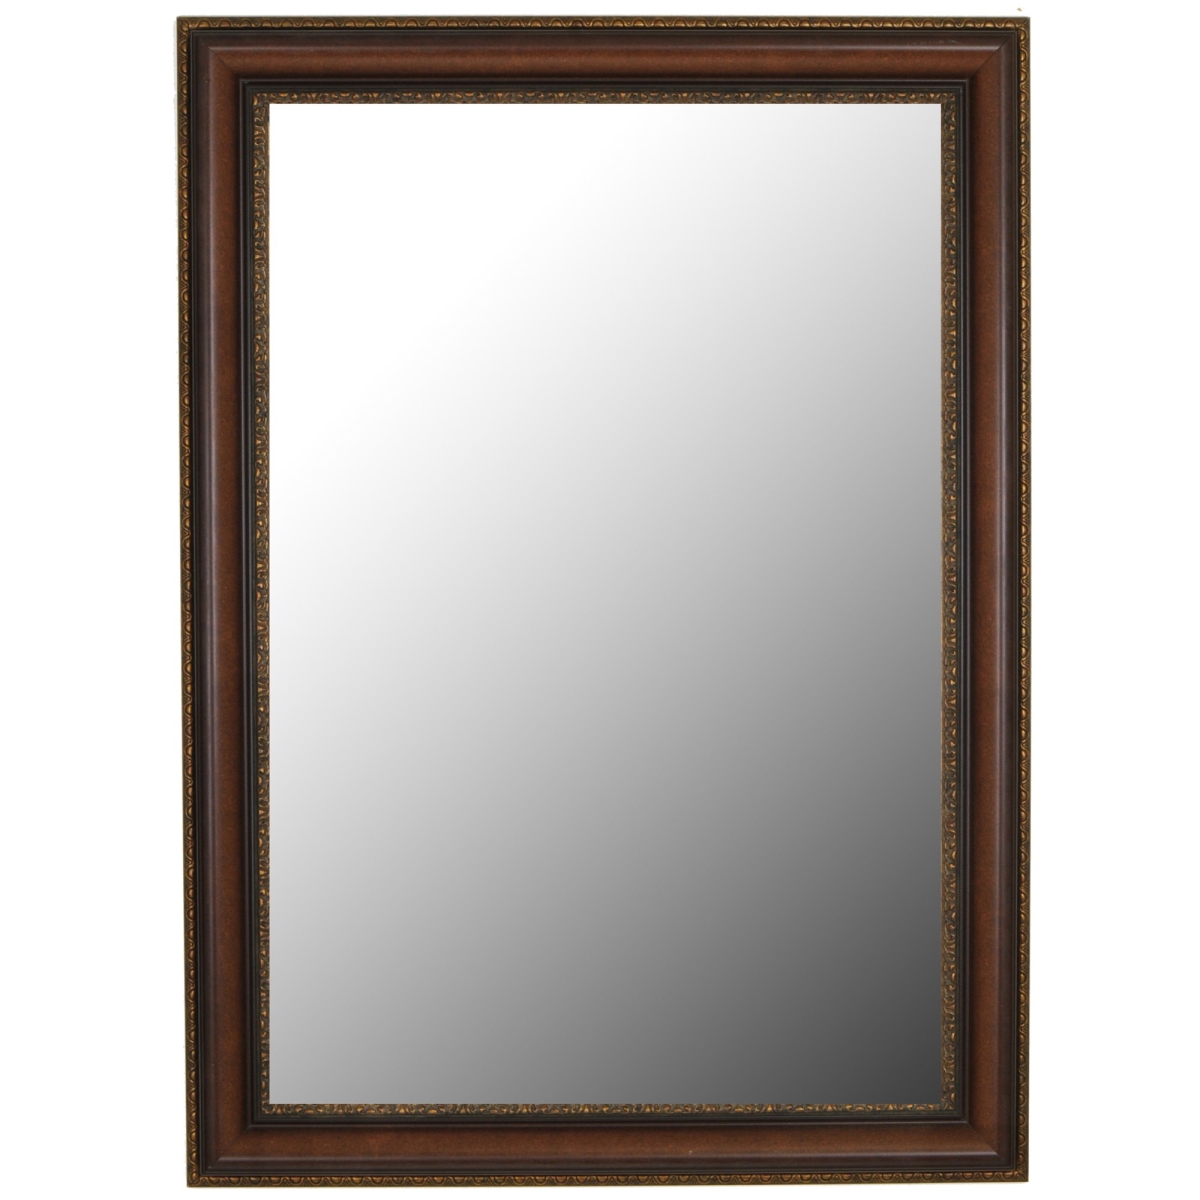 Hitchcock Butterfield 810503 Brown Janette Wall Mirror - 35.5 X 45.5 In.